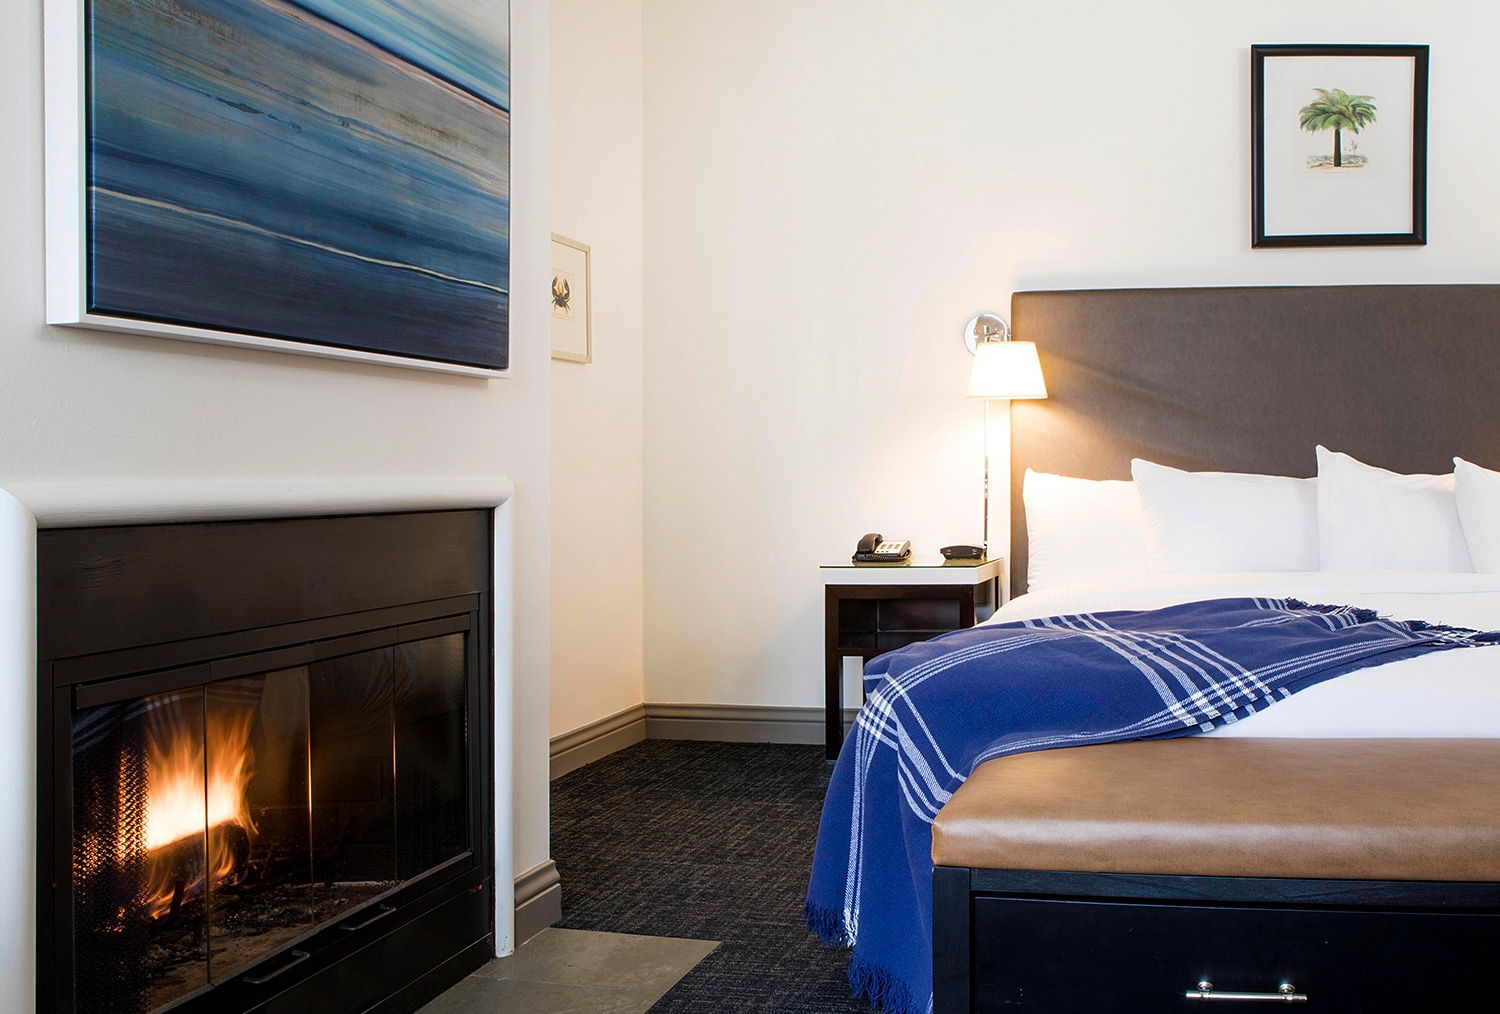 Set a cozy mood with a warm fire, all guest rooms have fireplaces